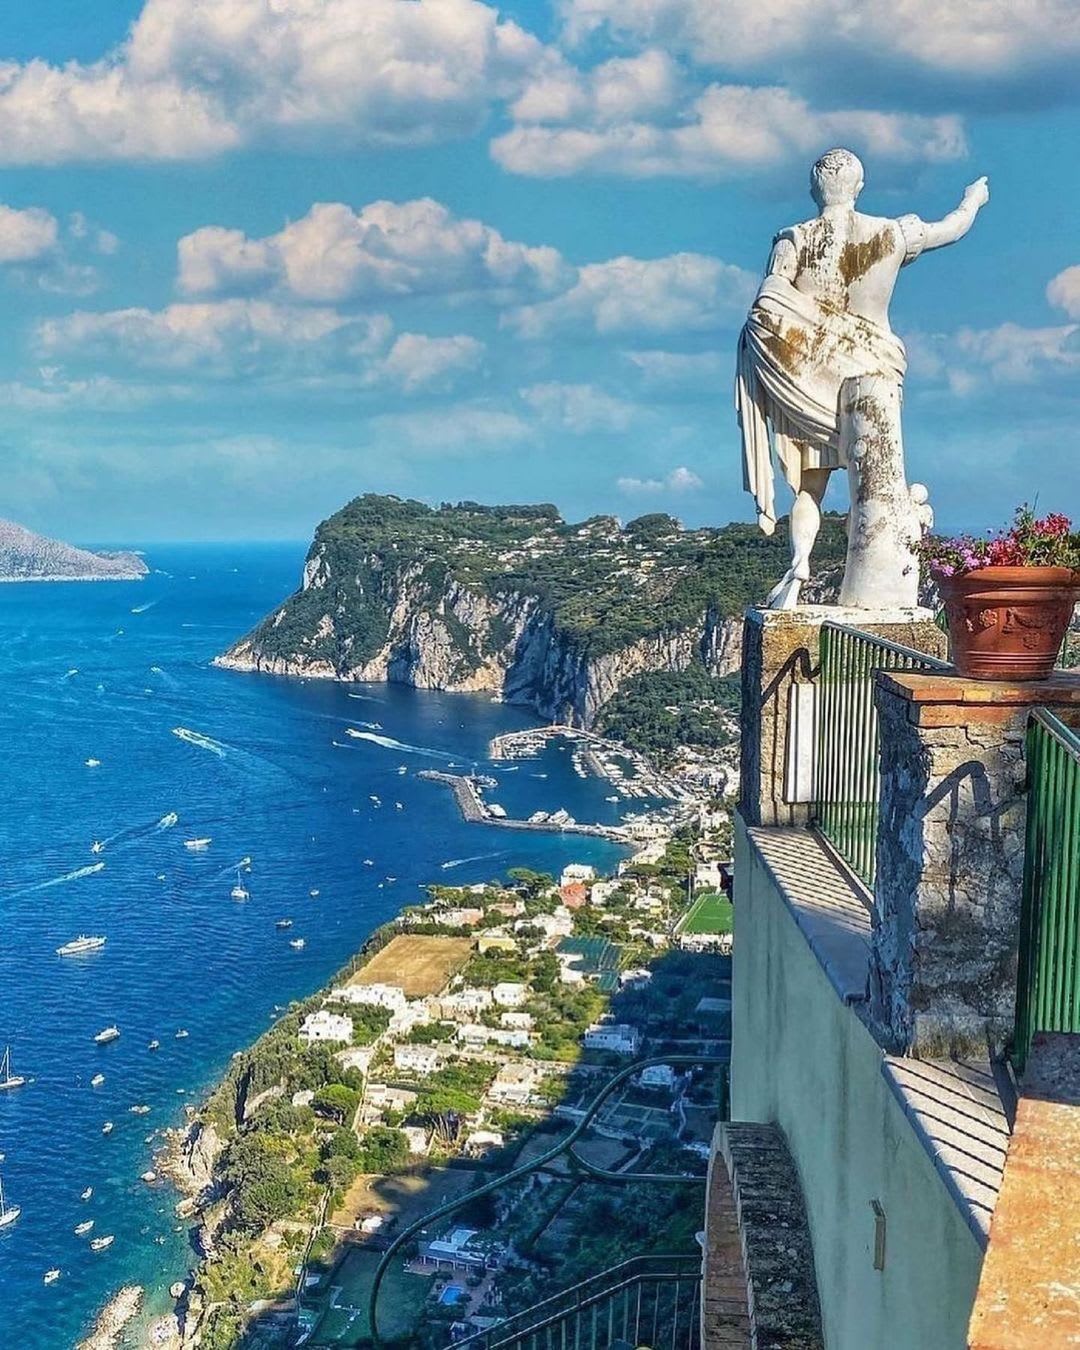 View of Capri from Hotel Caesar Augustus (Photo credit to IG pinkines)